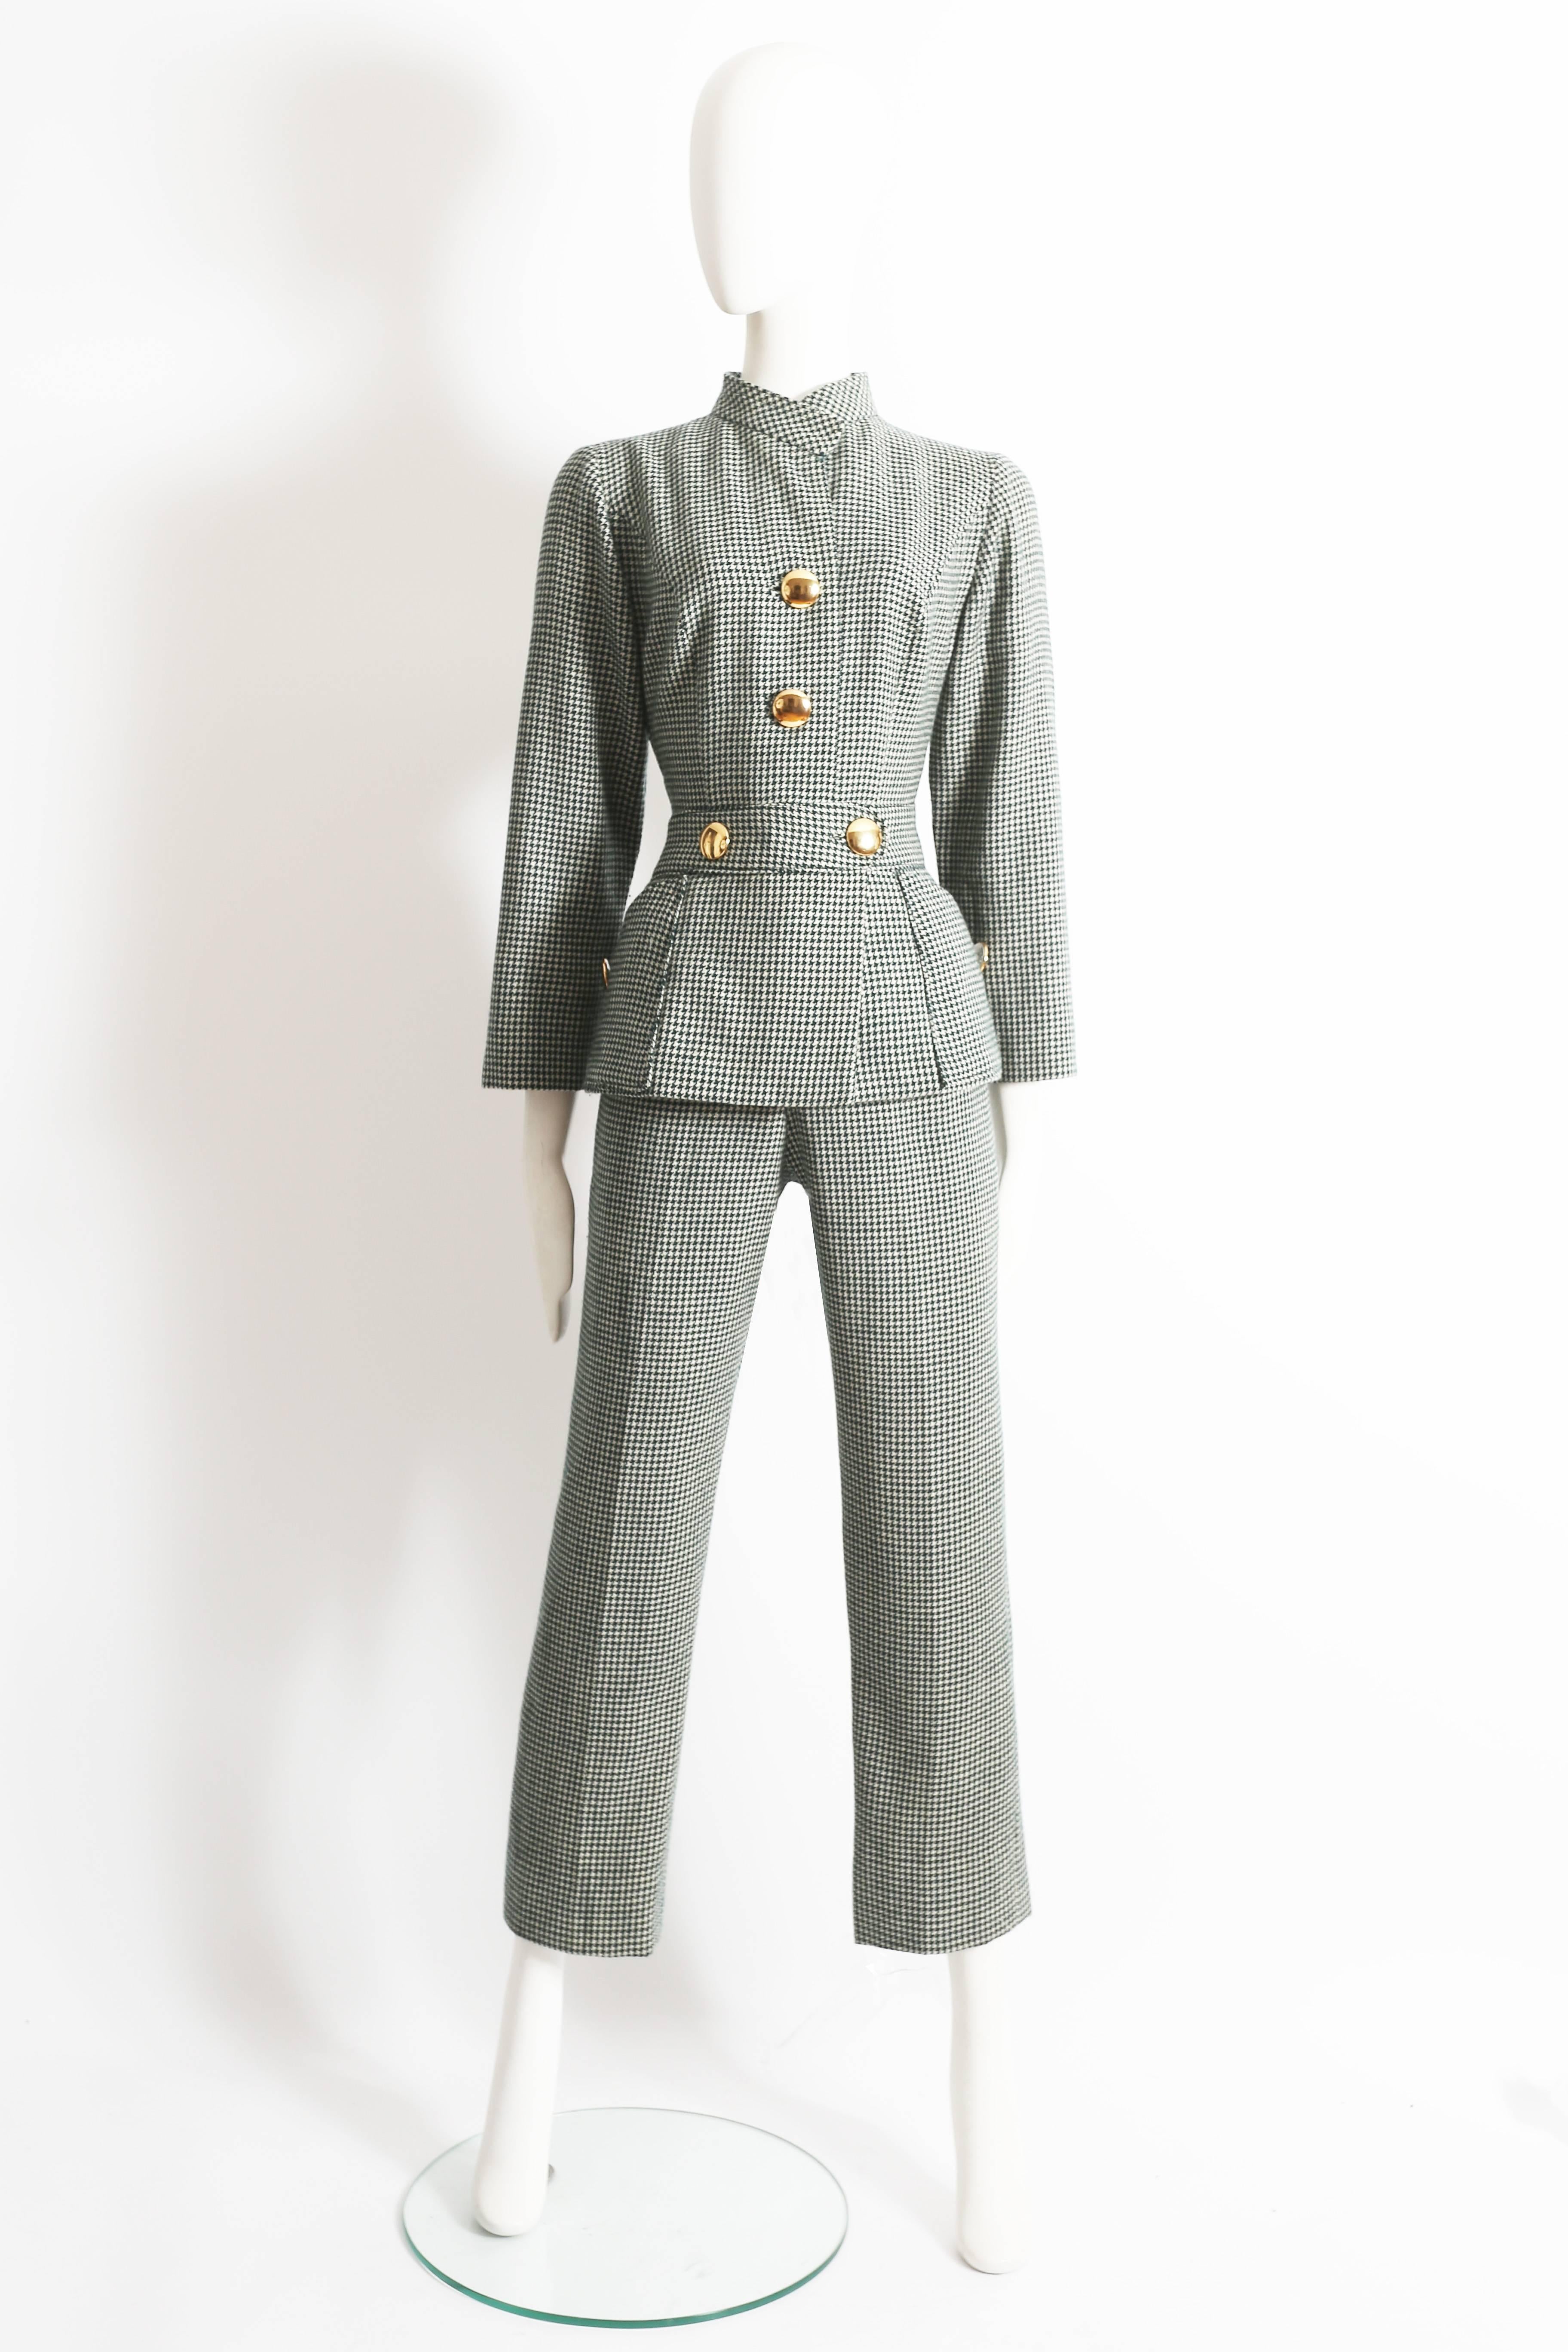 Presenting a stylish green and white houndstooth wool jumpsuit, a timeless treasure dating back to the chic 1960s era. This jumpsuit exudes elegance and sophistication, showcasing the classic houndstooth pattern in a modern and contemporary